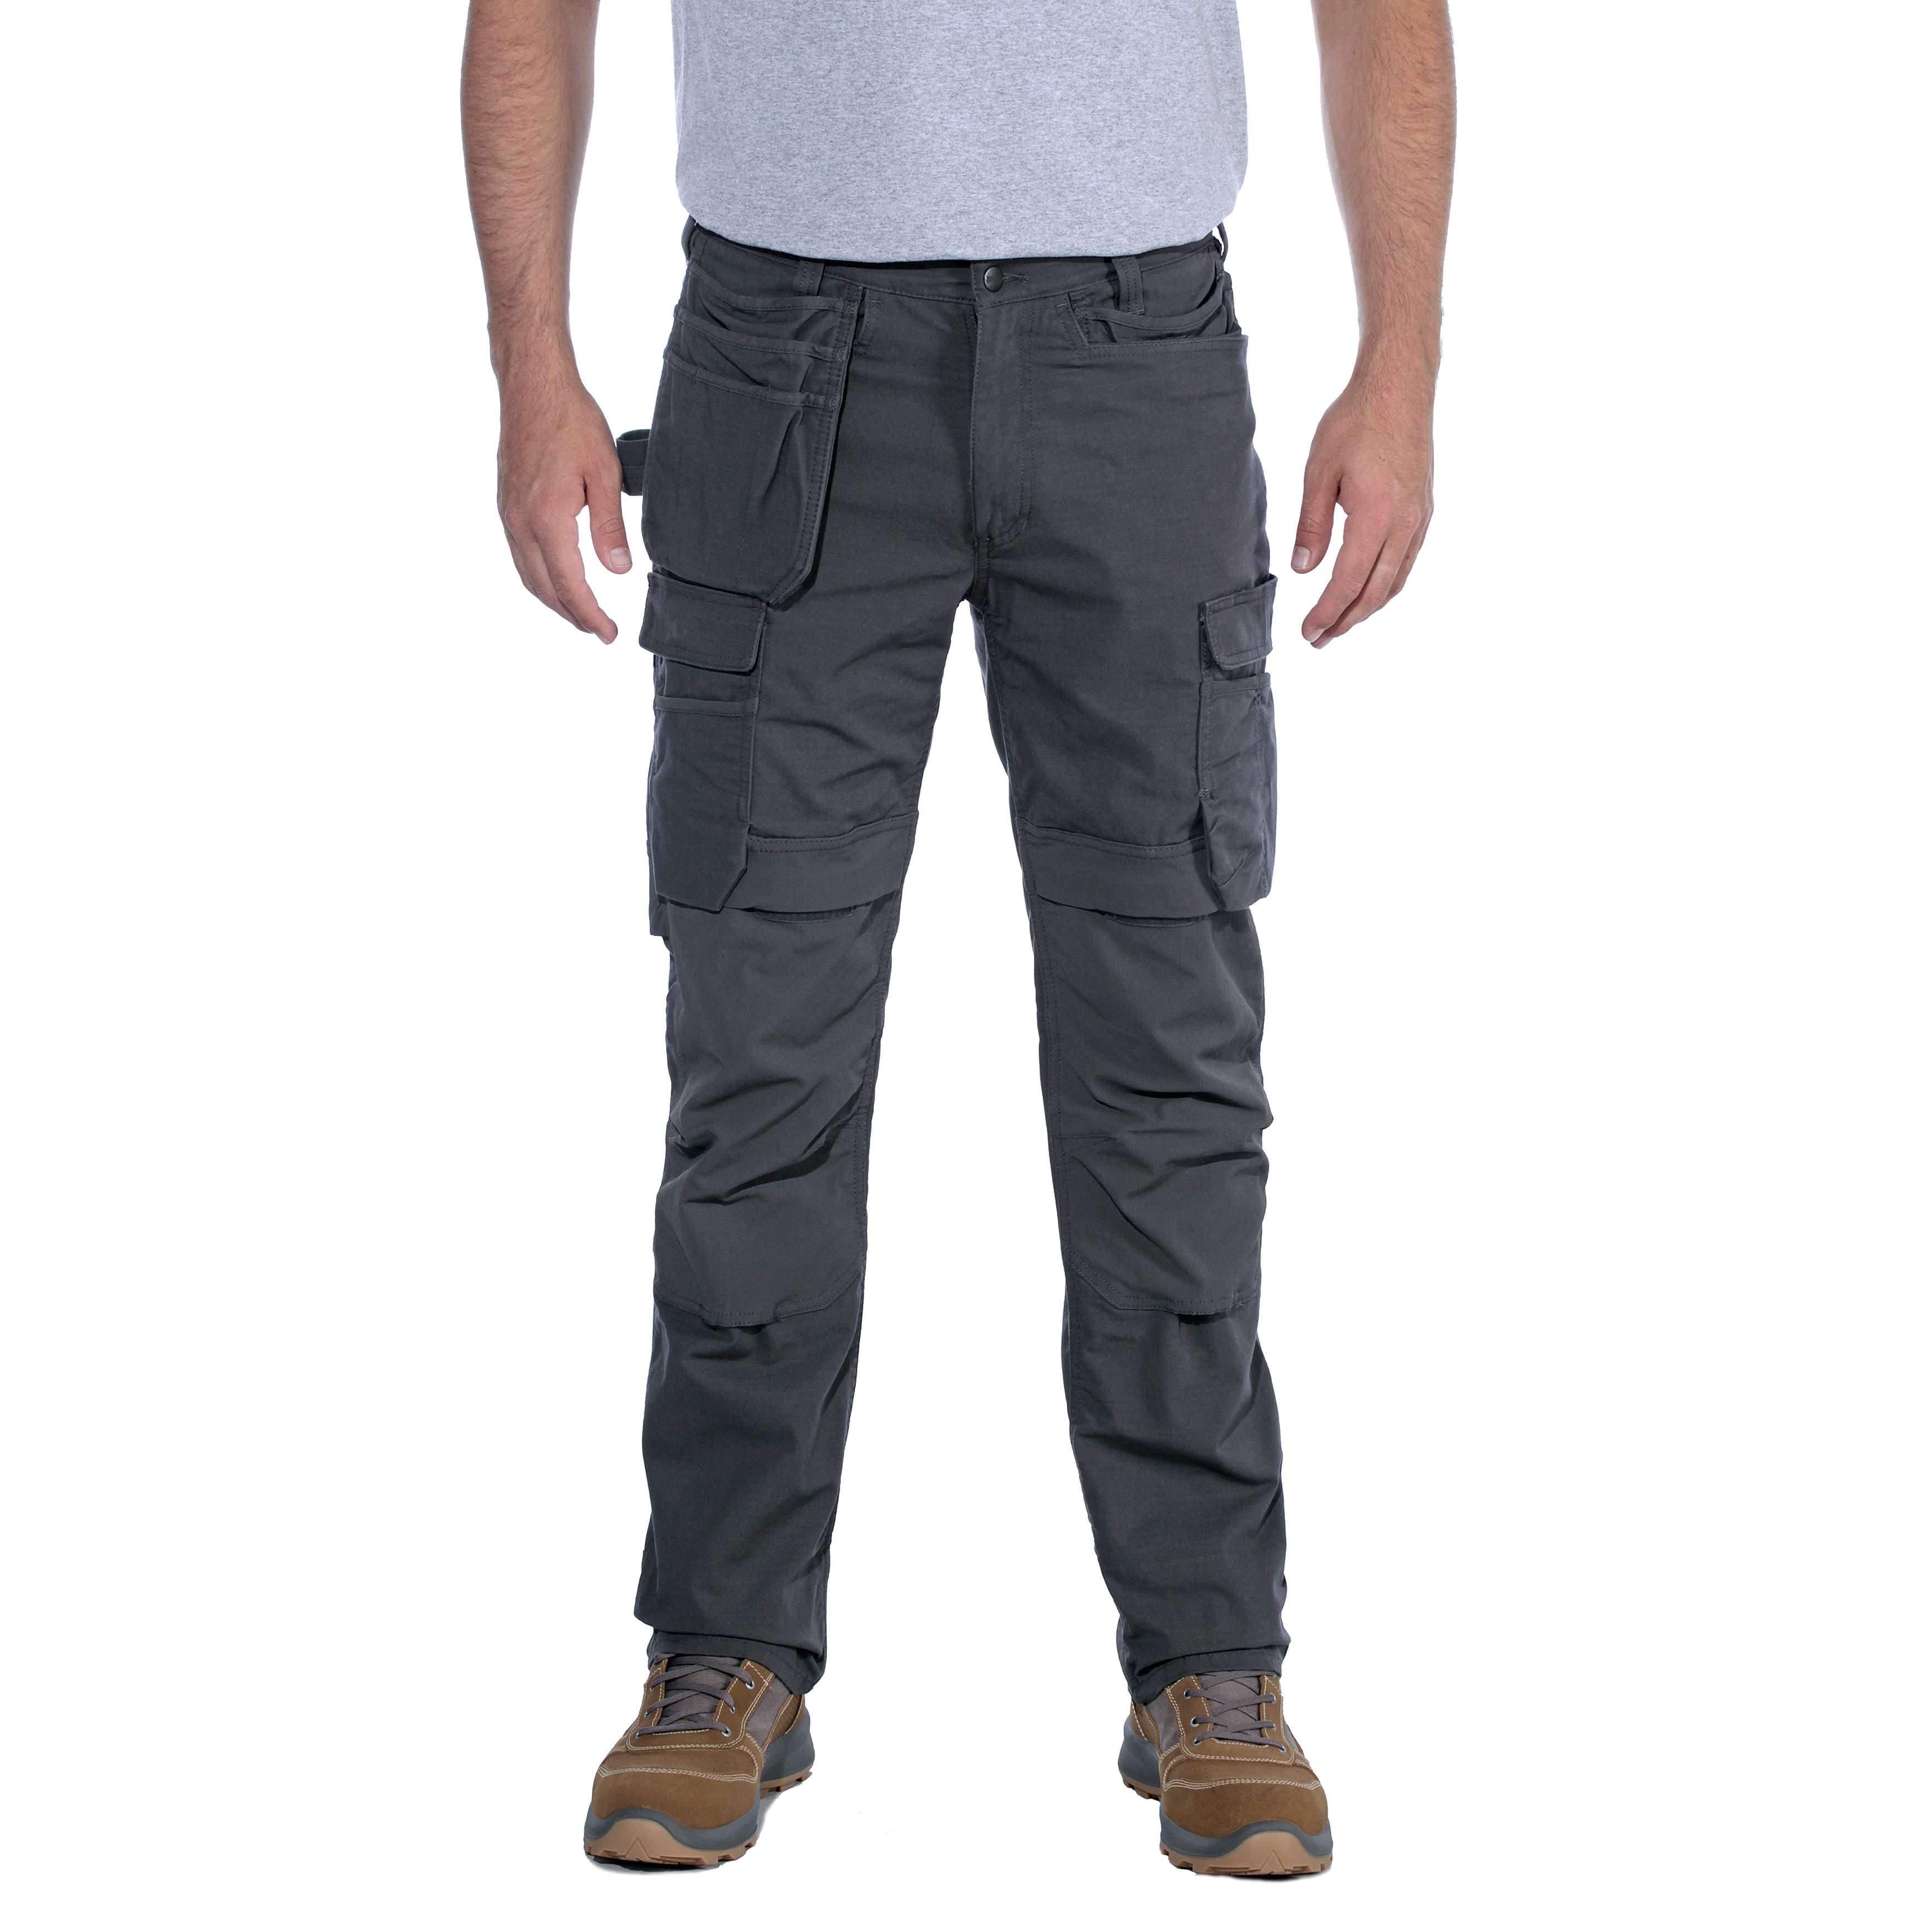 Carhartt Mens Washed Duck Multipocket Durable Cargo Pants Trousers